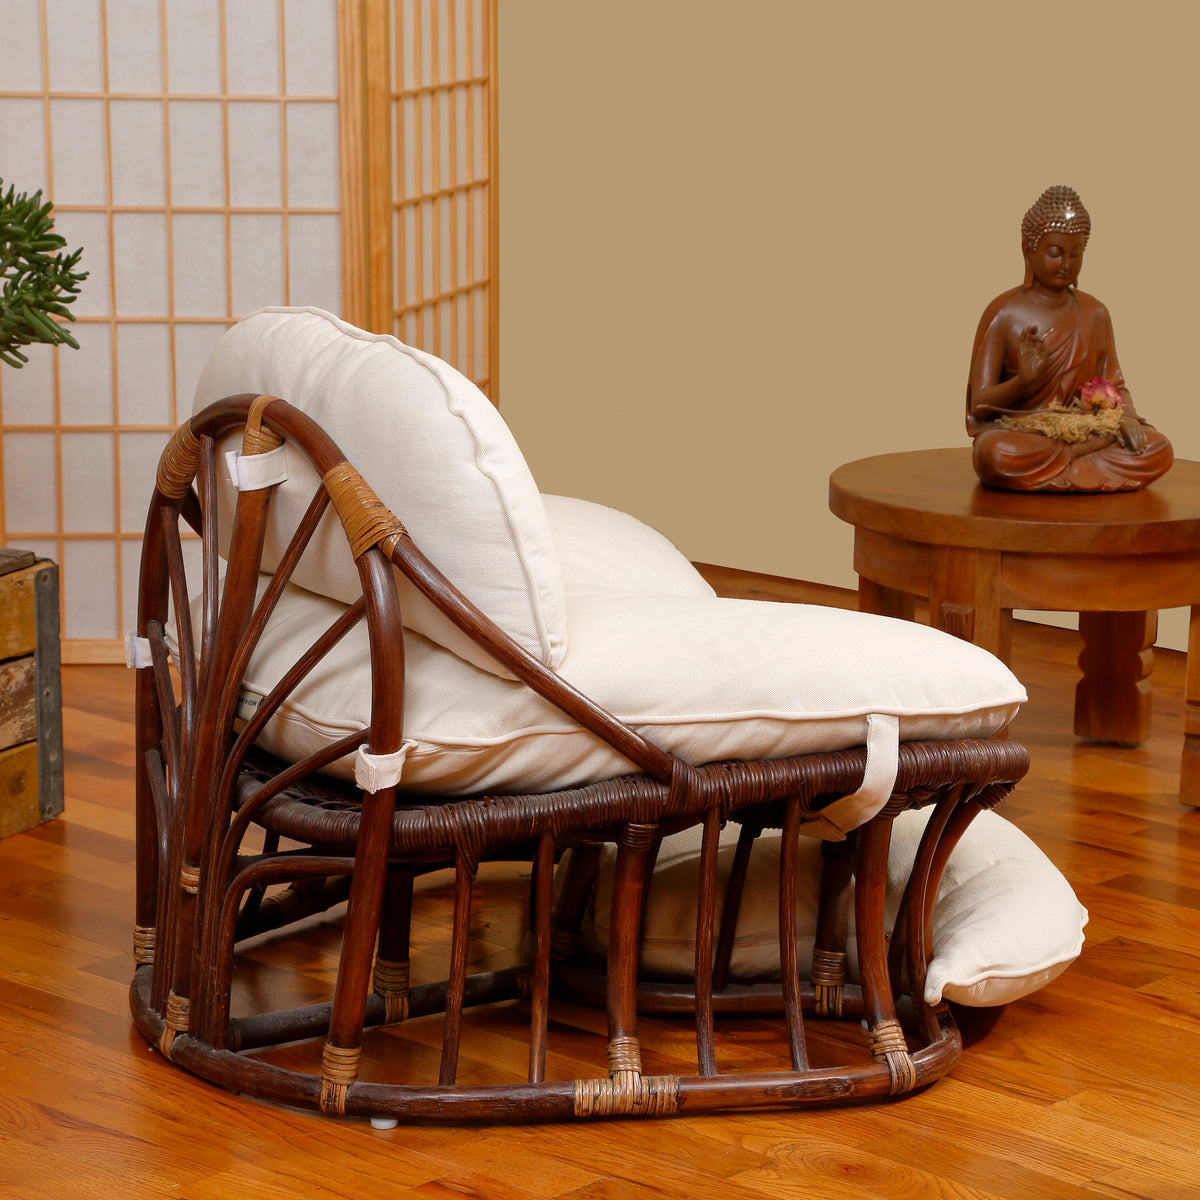 Harmony in Design Elevation Meditation Chair back angle